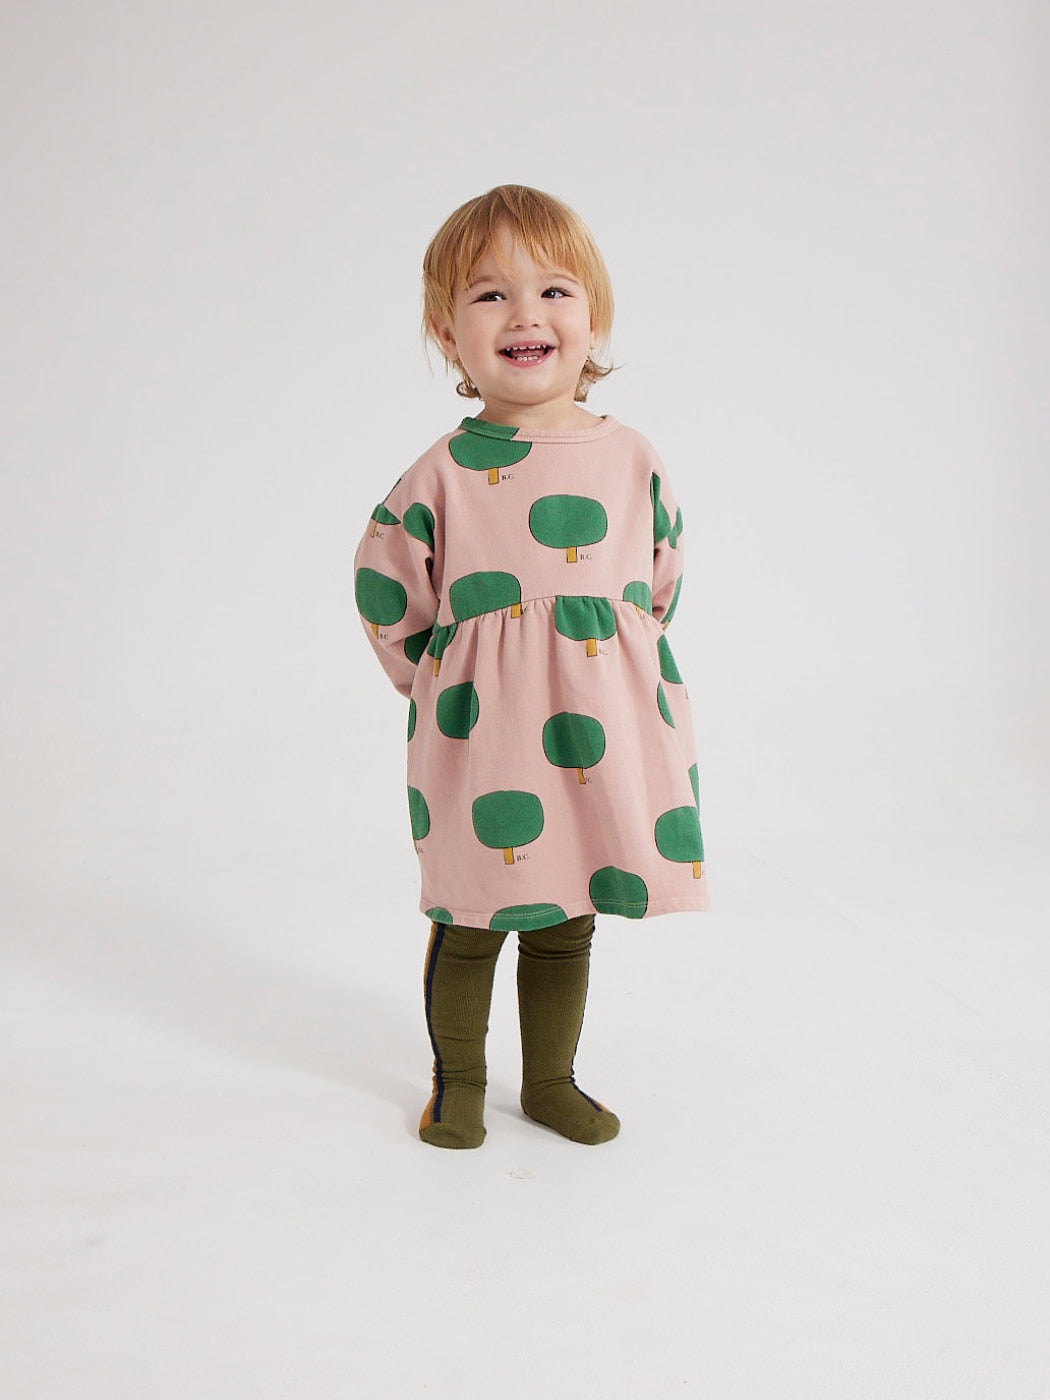 Green Tree All Over Baby Dress